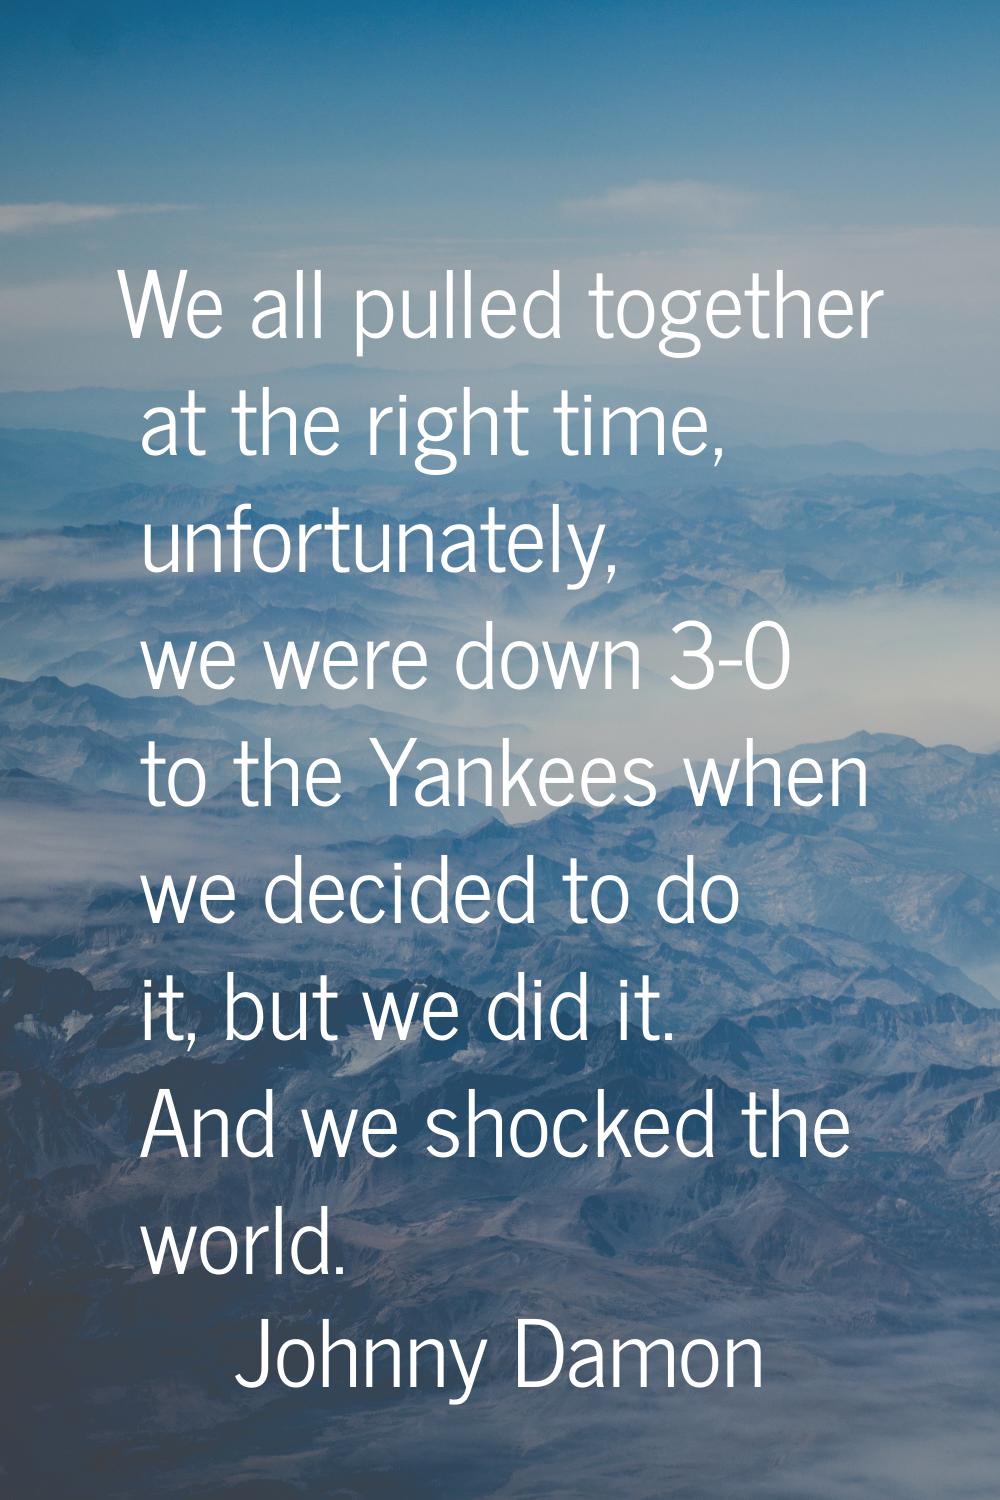 We all pulled together at the right time, unfortunately, we were down 3-0 to the Yankees when we de